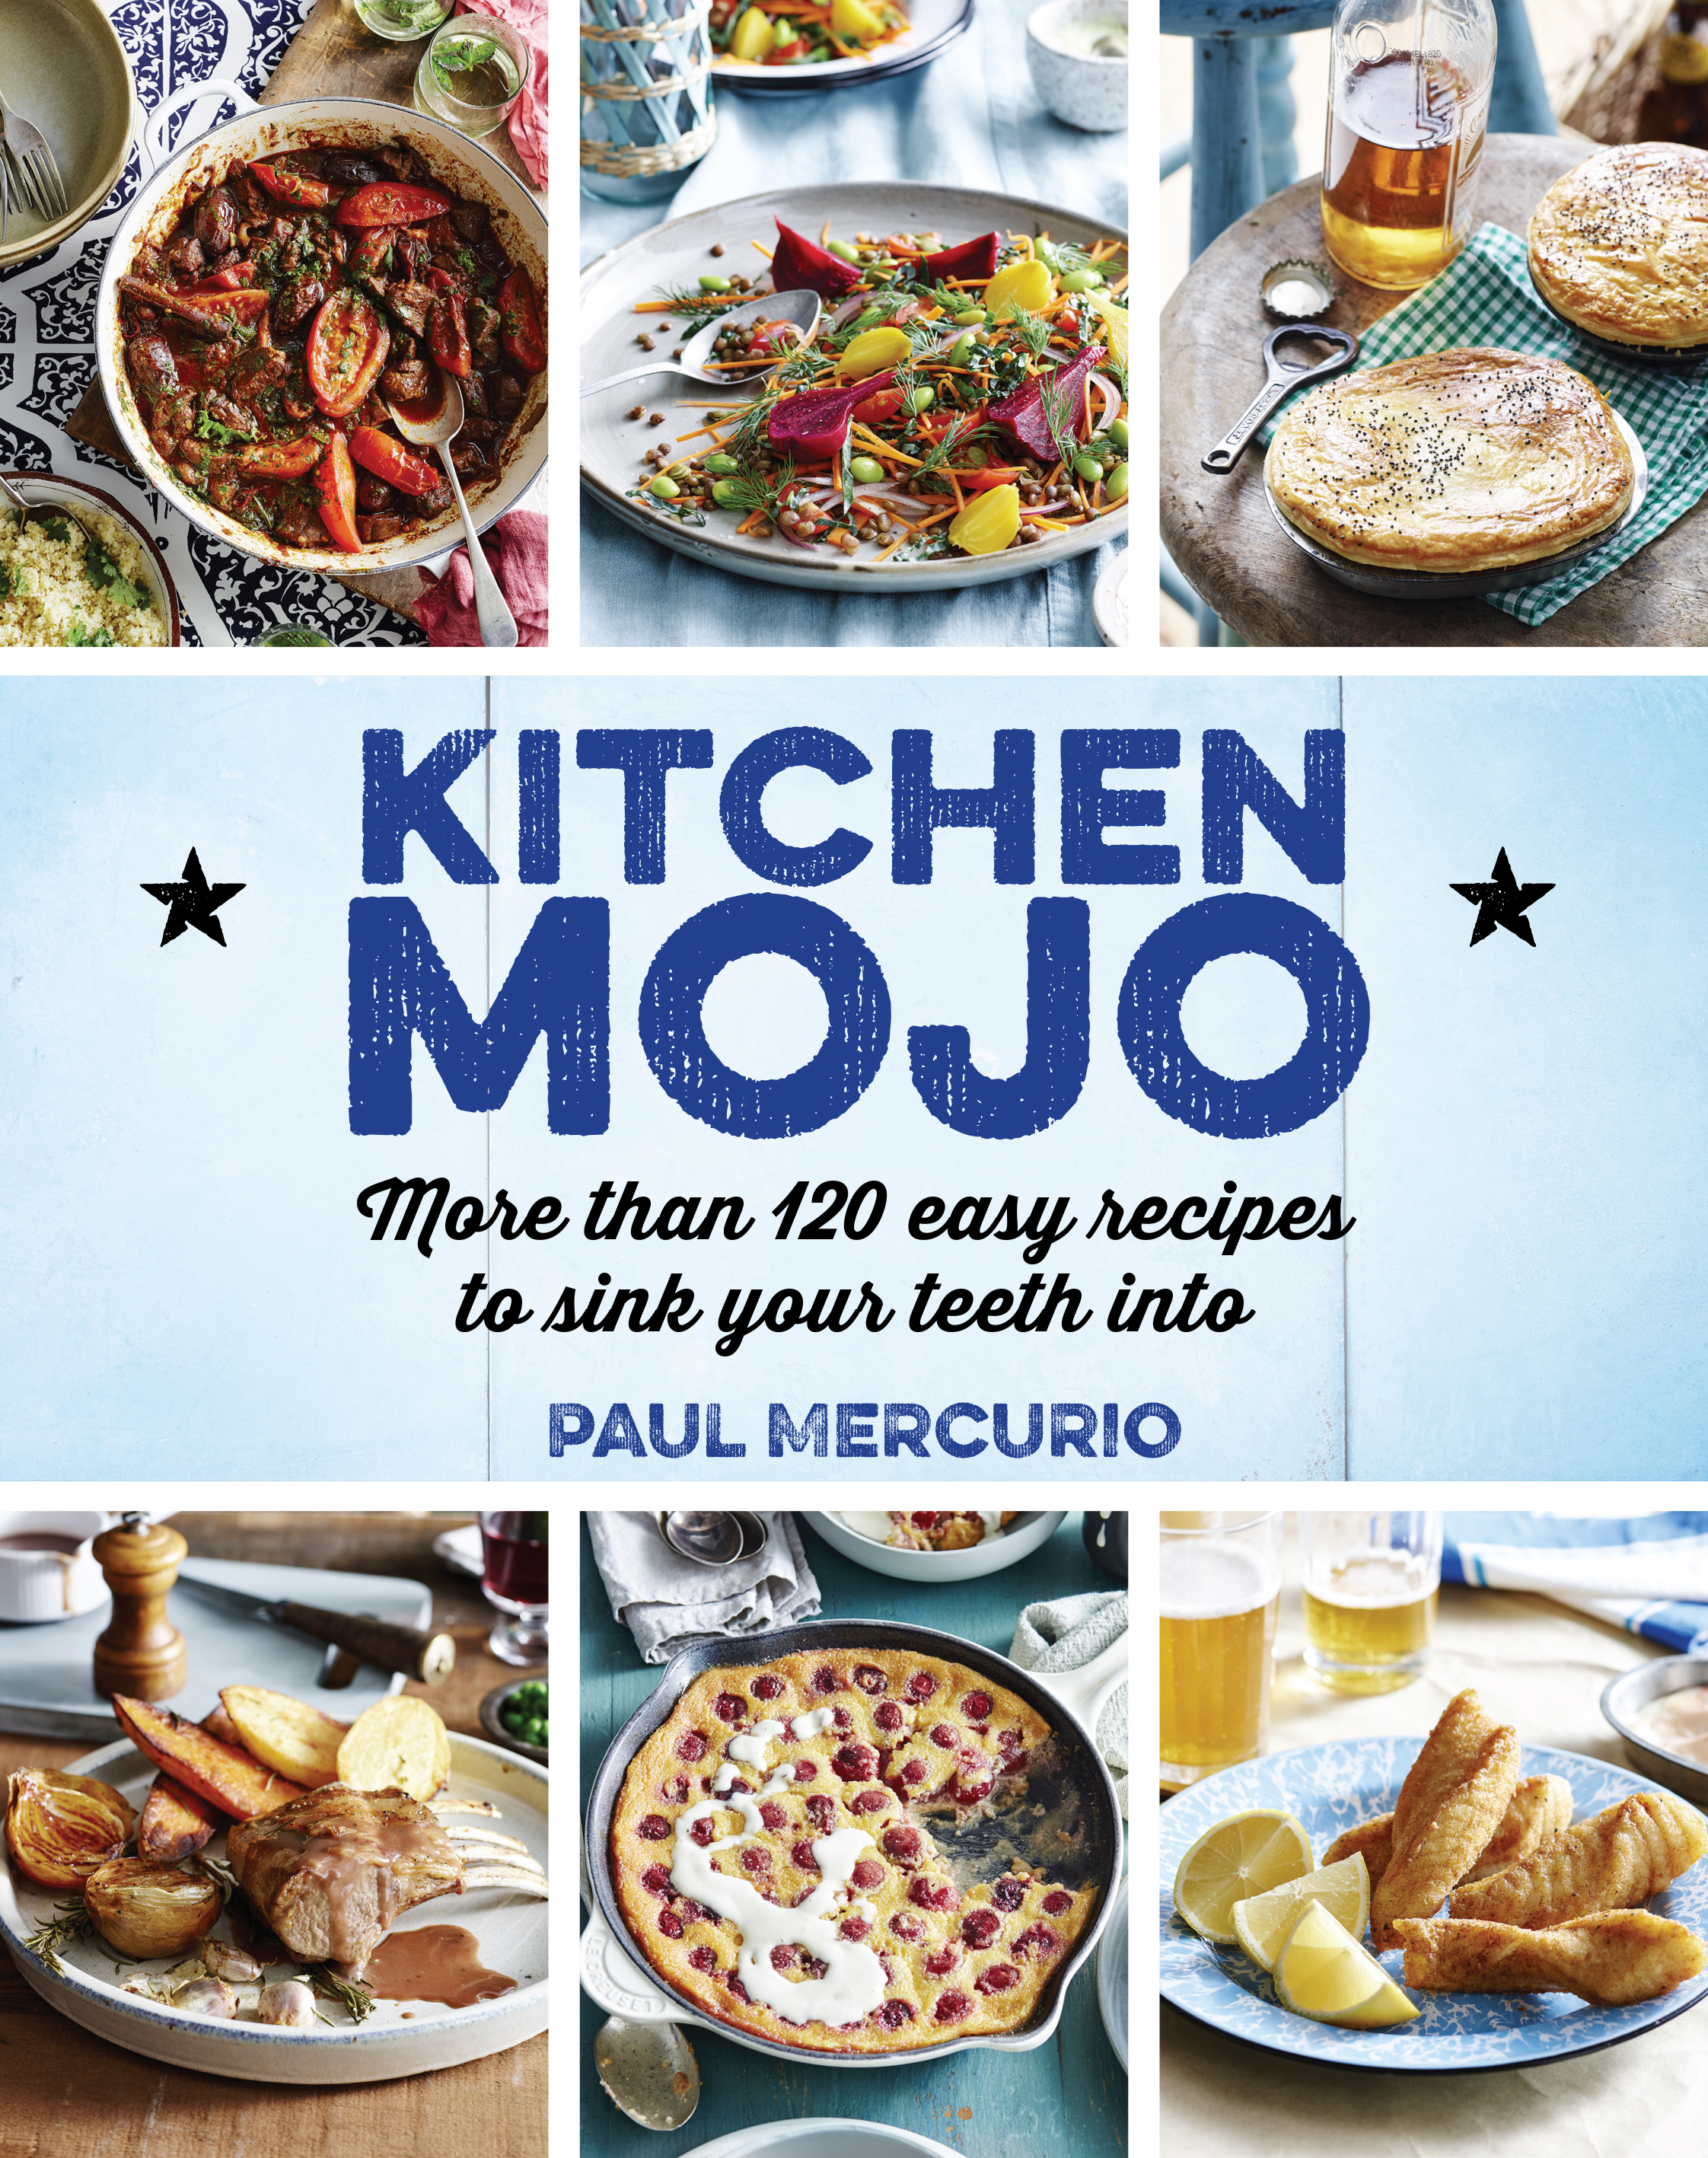 Recipe and image from Kitchen Mojo by Paul Mercurio, published by Murdoch Books